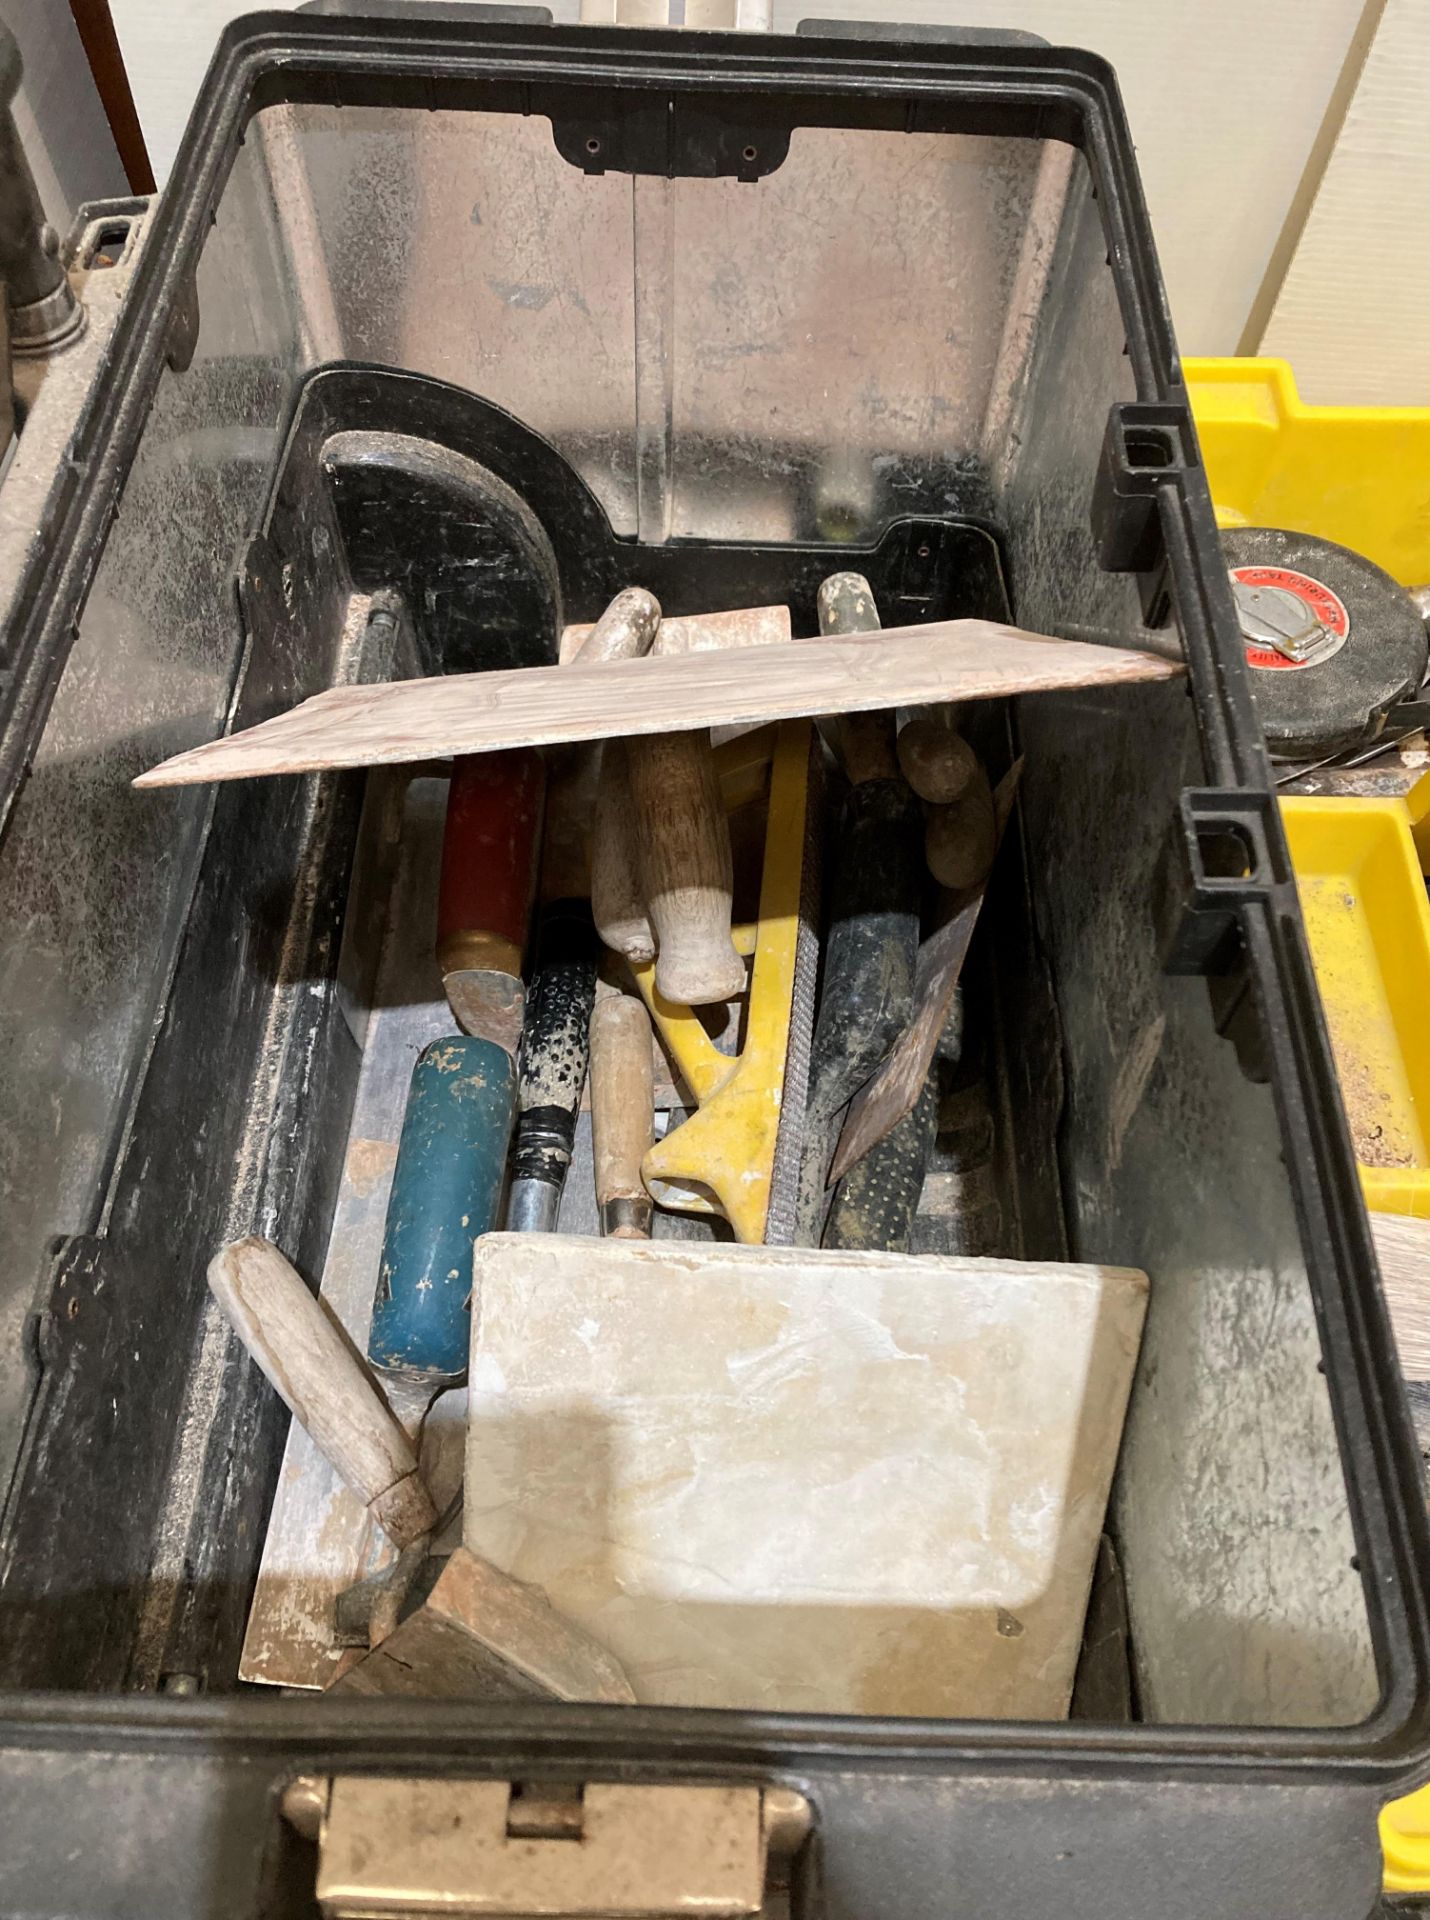 2 x Large tool boxes and contents - assorted plastering equipment (trowels, board, - Image 4 of 4